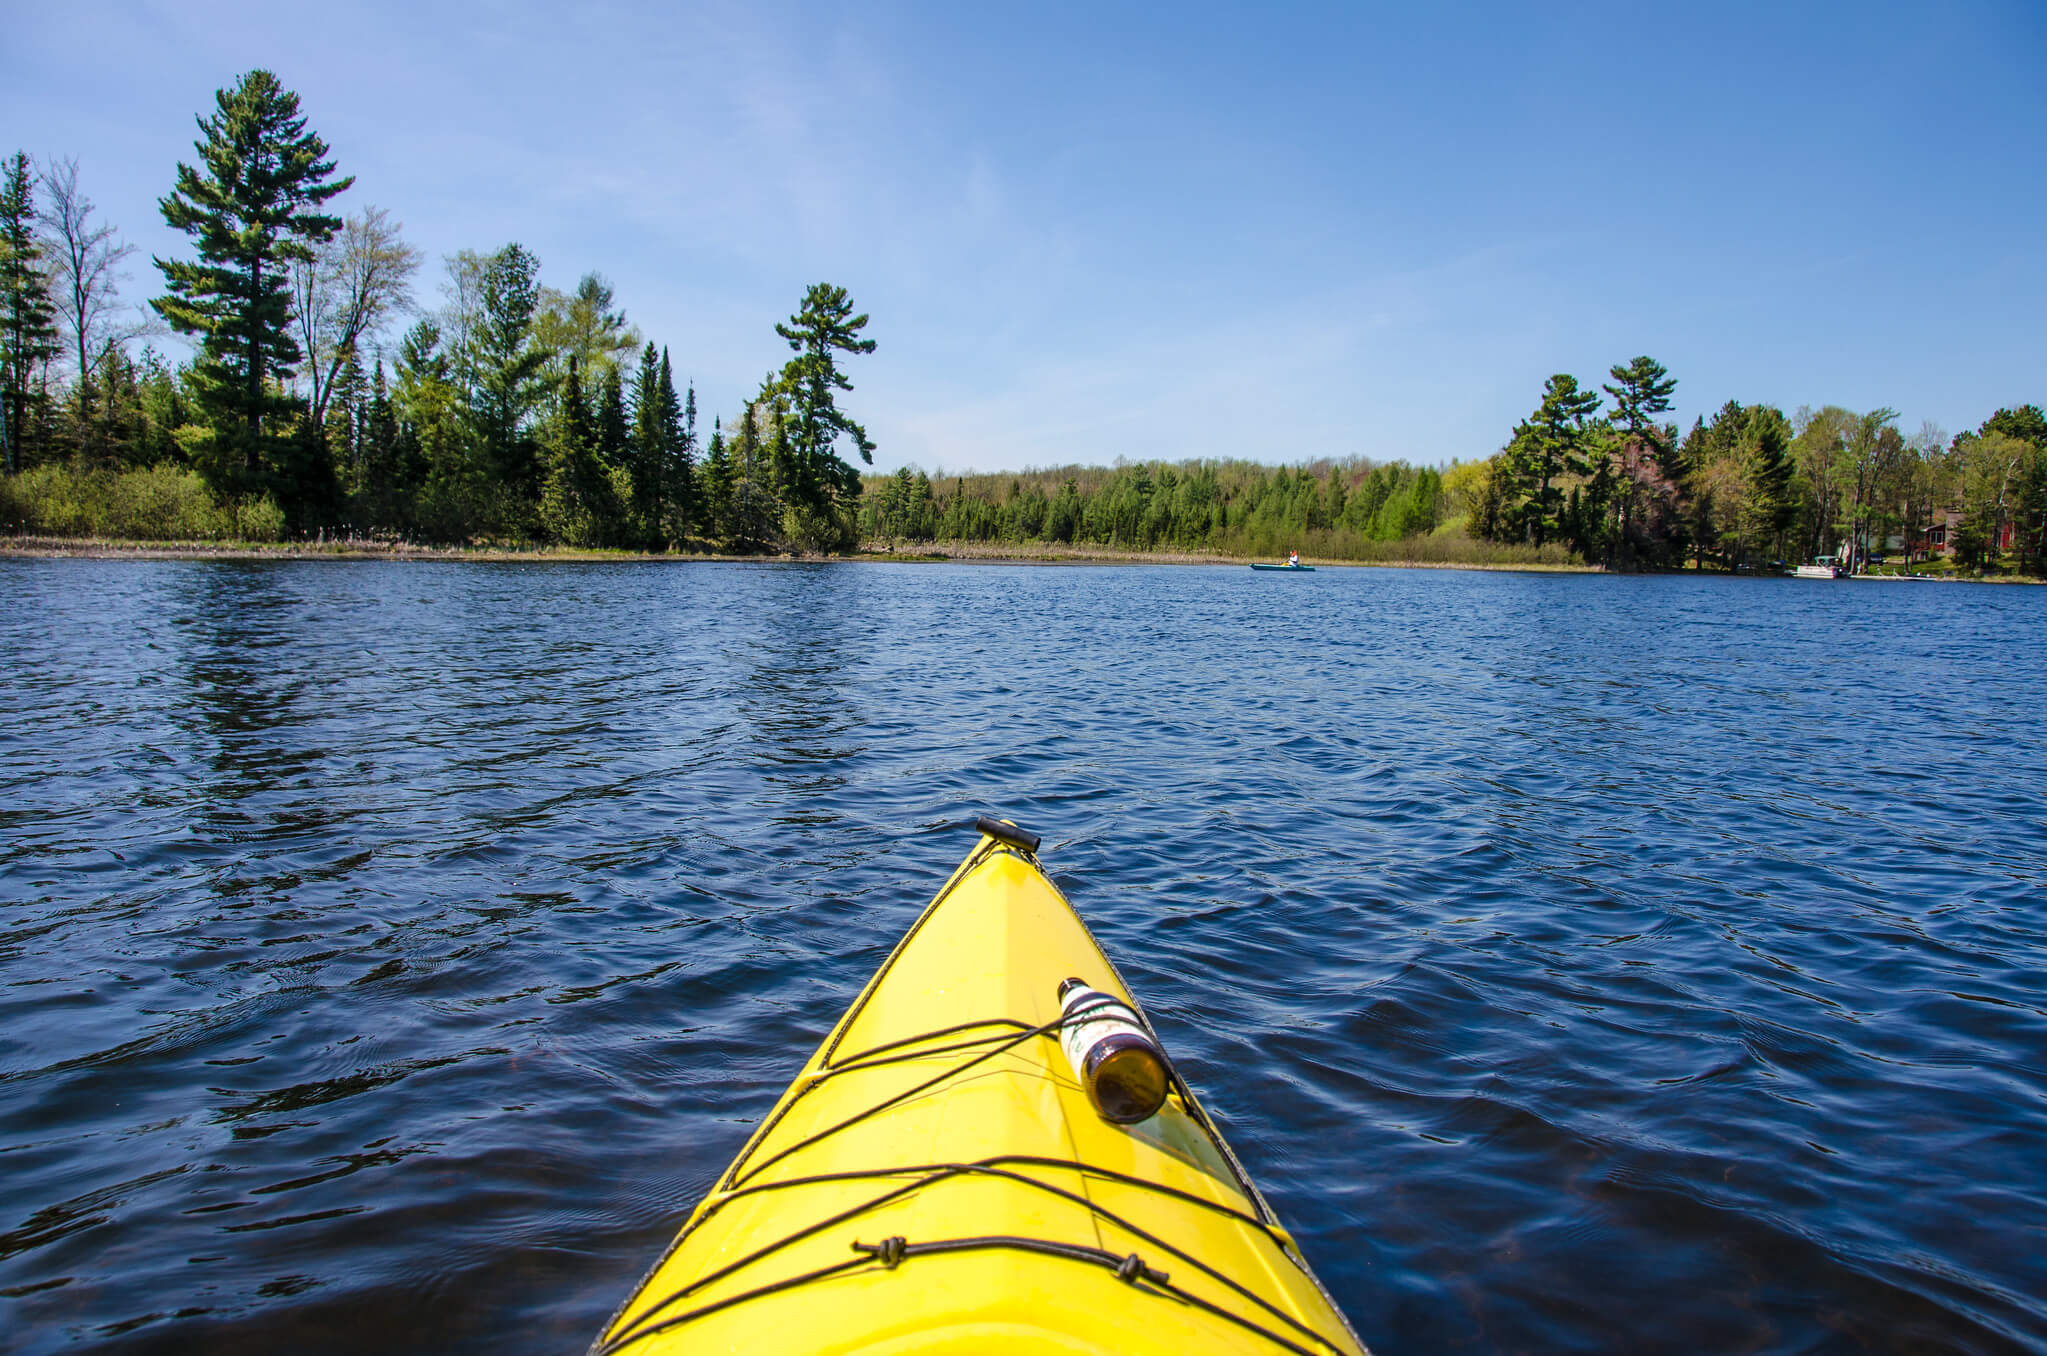 Kayaking in Rhinelander, where the Knowles-Nelson Stewardship Program has boosted outdoor recreation opportunities.